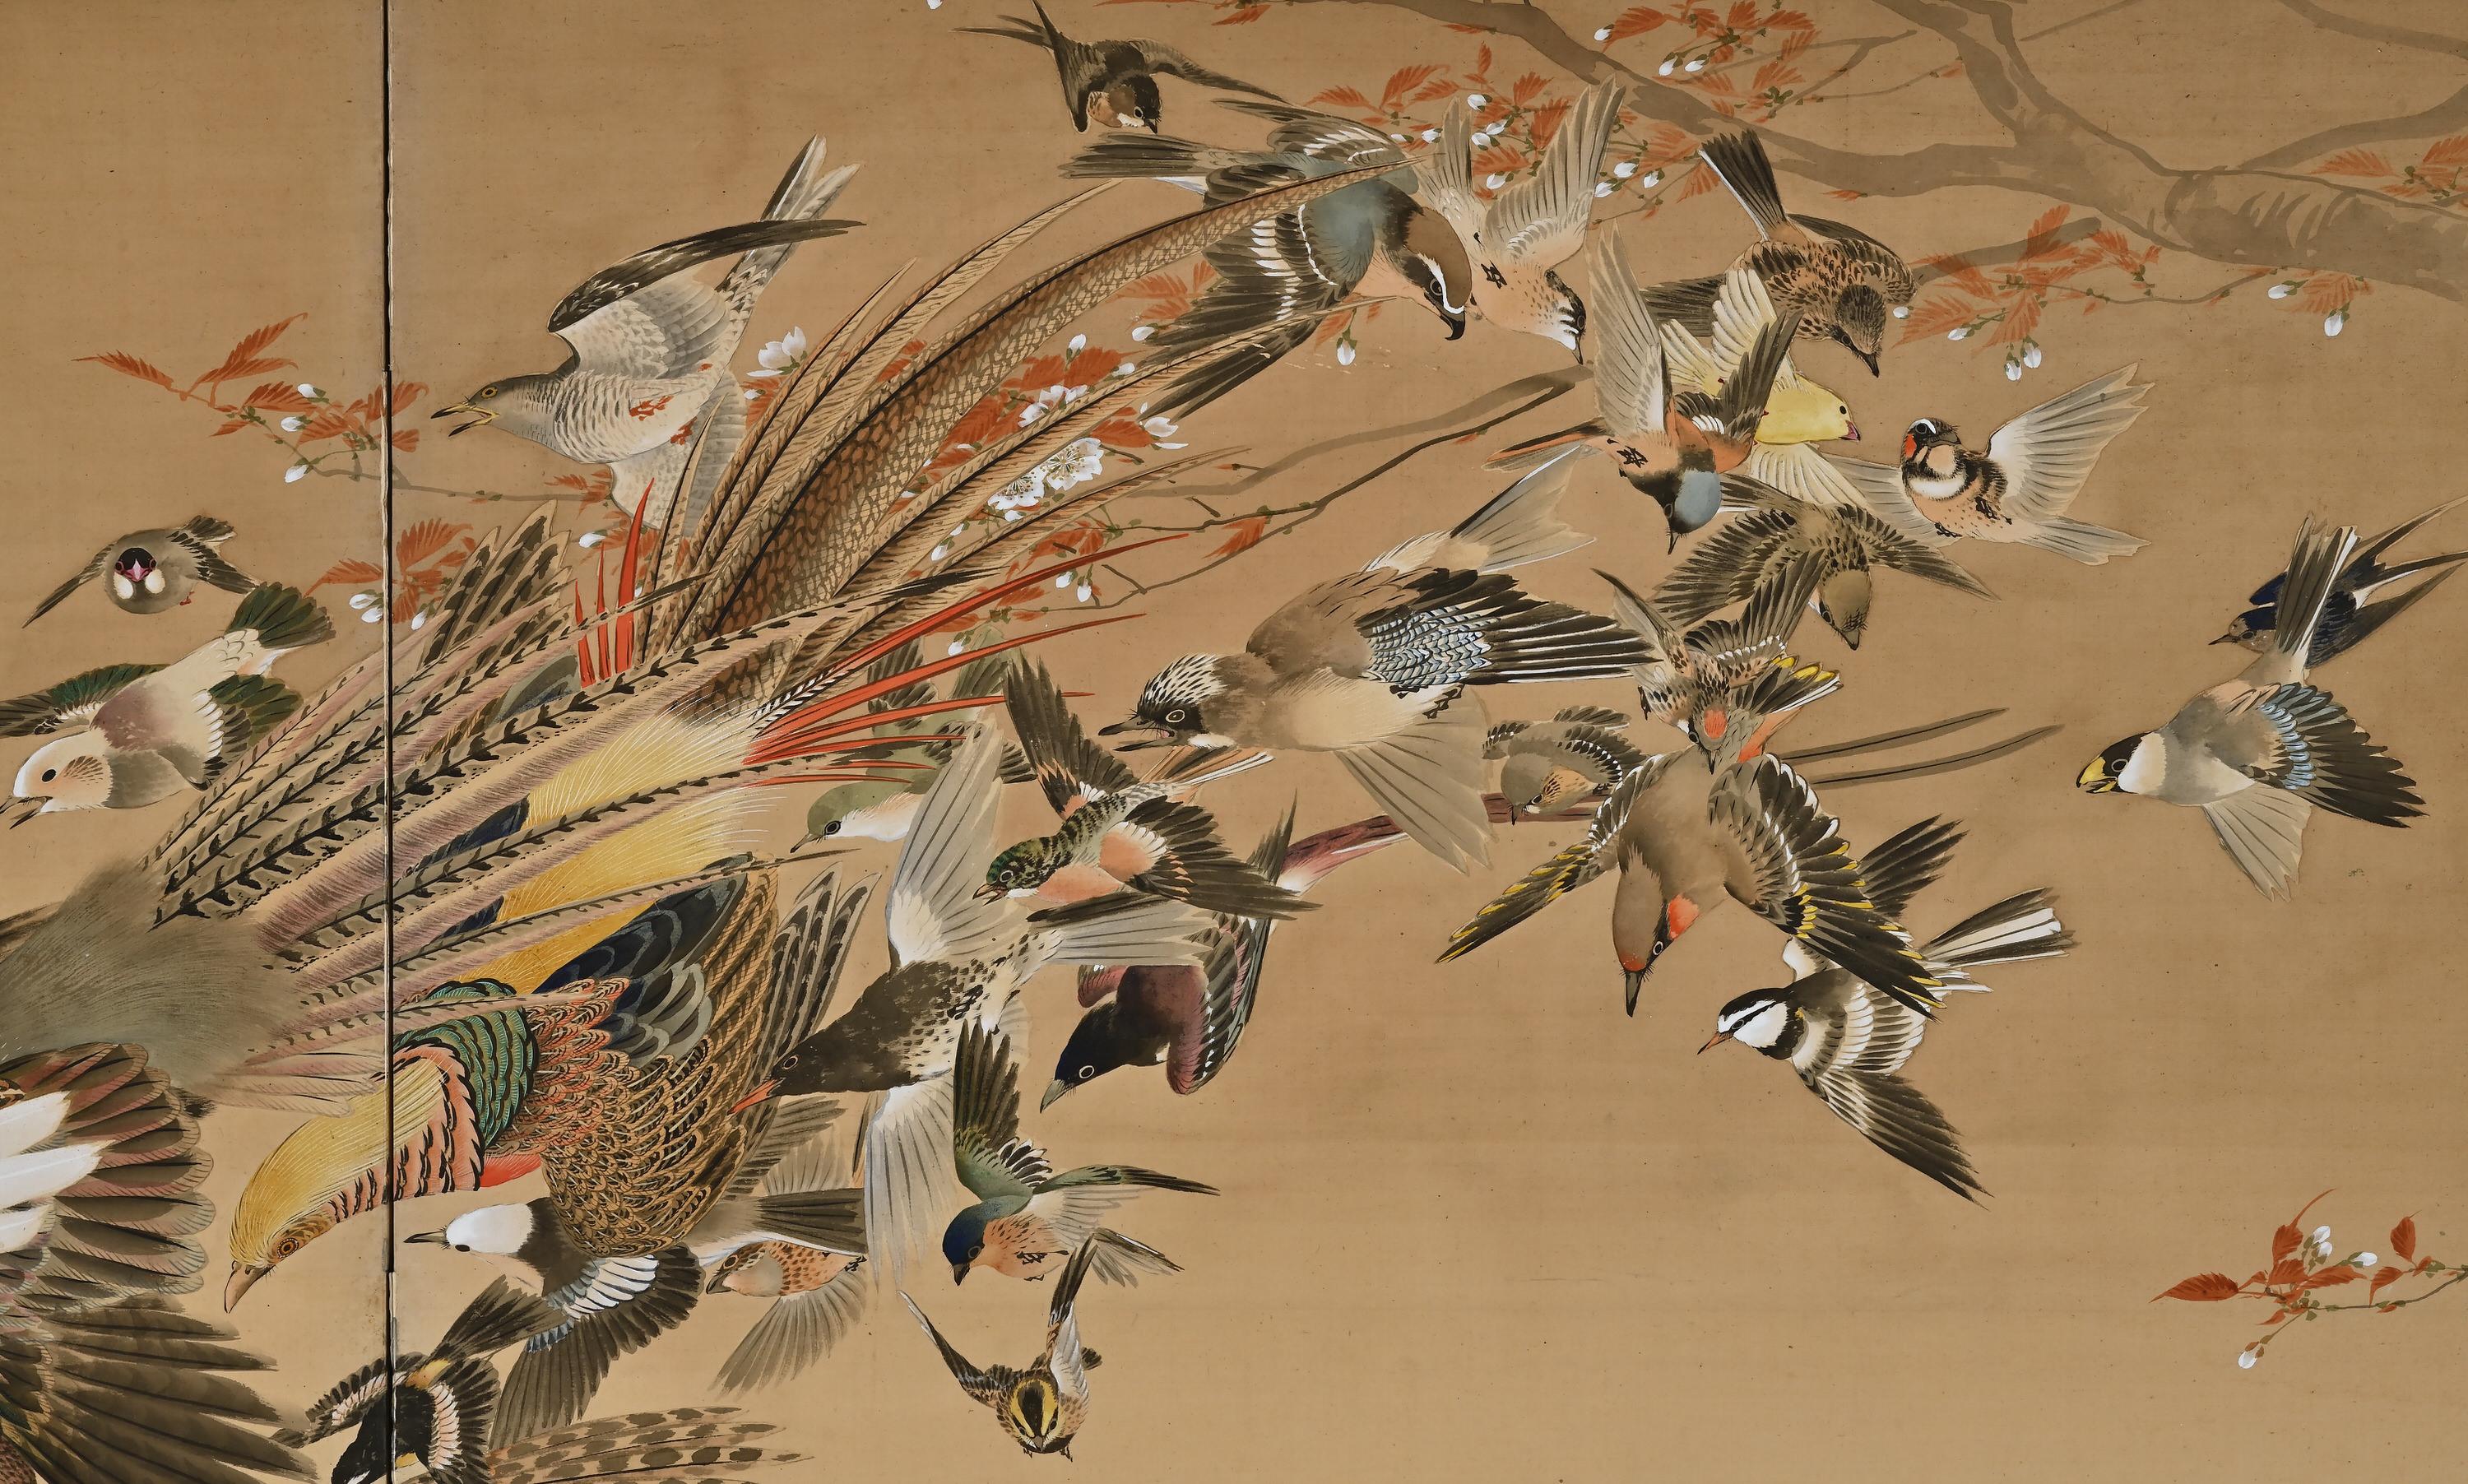 Early 20th Century Meiji Period Japanese Screen Pair, One Hundred Birds by Hasegawa Gyokujun For Sale